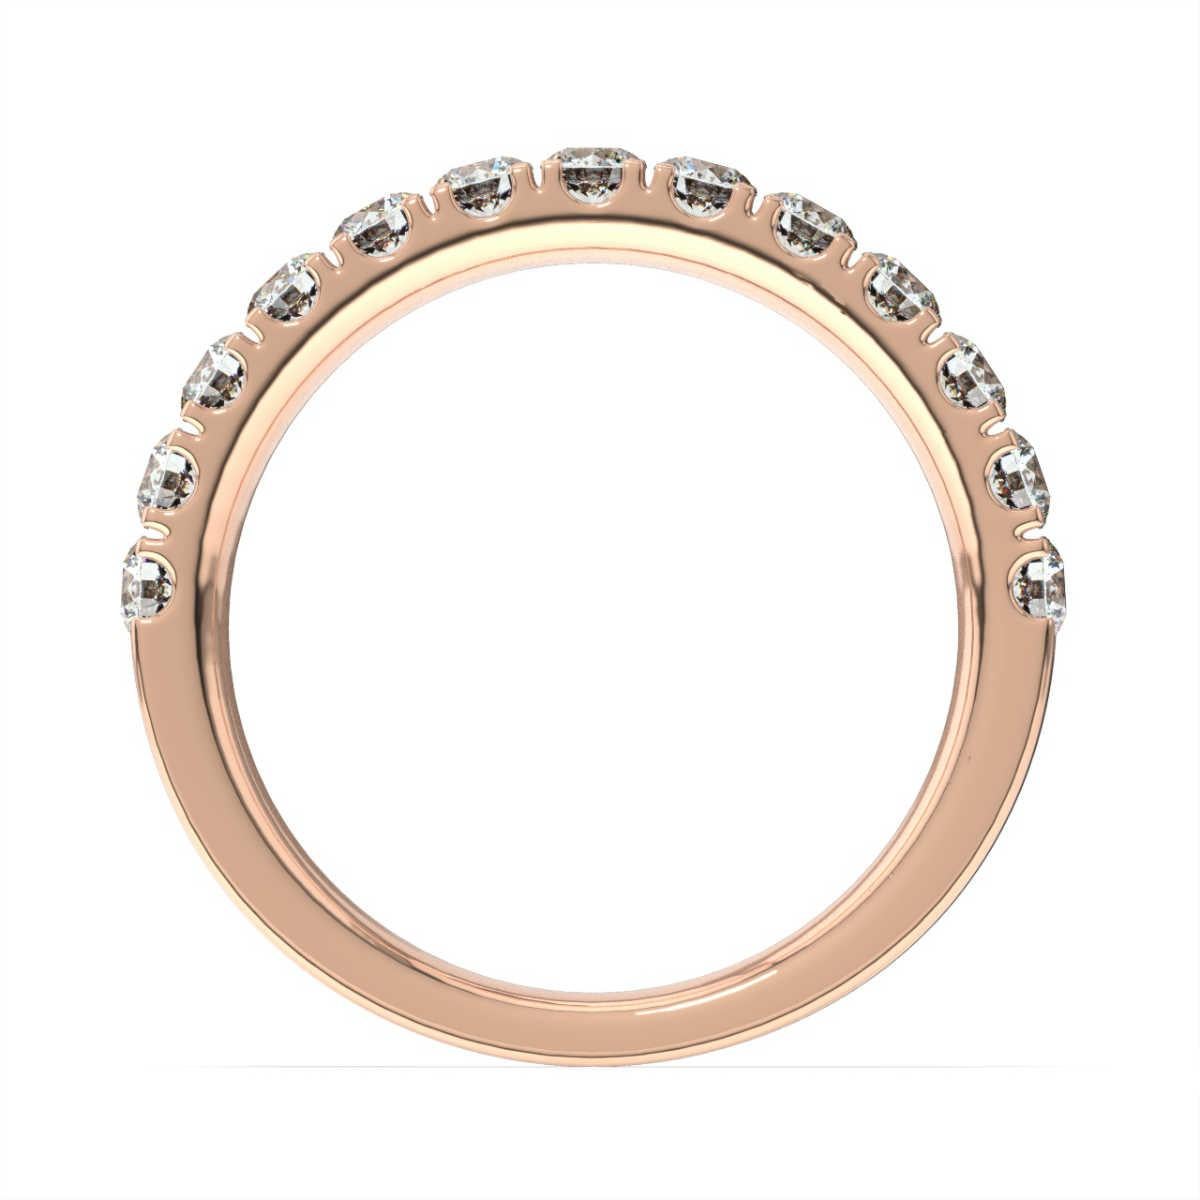 This ring features 13 perfectly matched round brilliant diamonds micro-prong set. Experience the difference!

Product details: 

Center Gemstone Color: WHITE
Side Gemstone Type: NATURAL DIAMOND
Side Gemstone Shape: ROUND
Metal: 18K Rose Gold
Metal